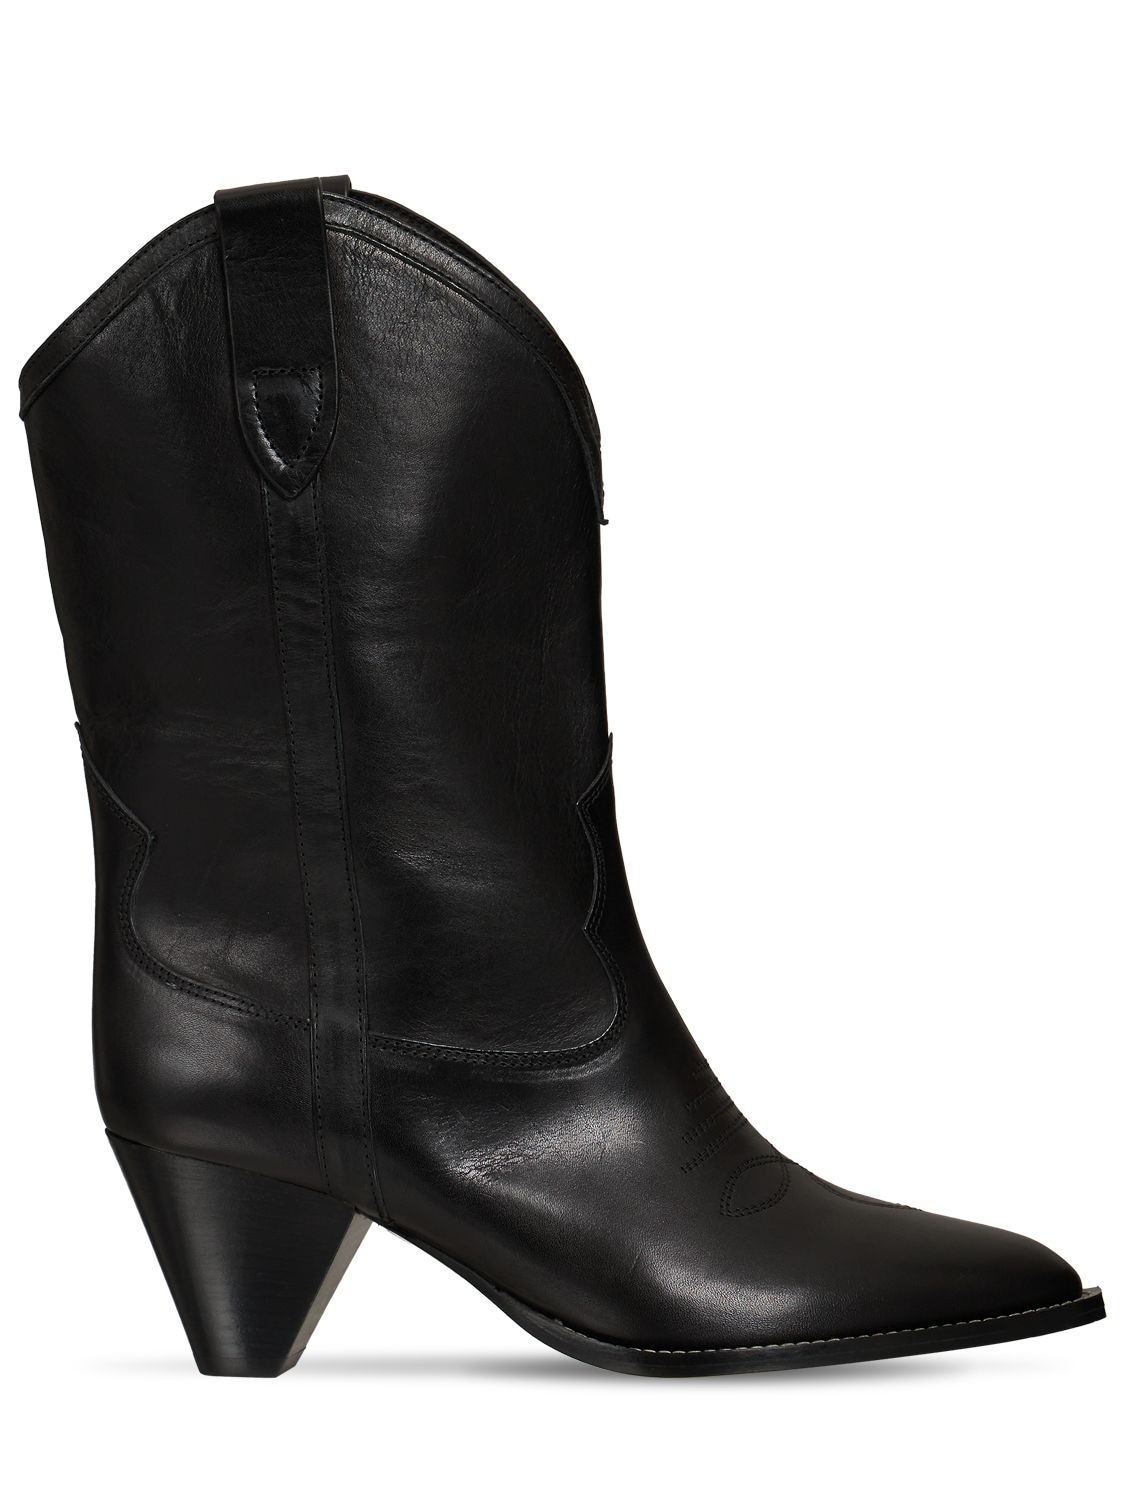 ISABEL MARANT 60MM LULIETTE LEATHER ANKLE BOOTS